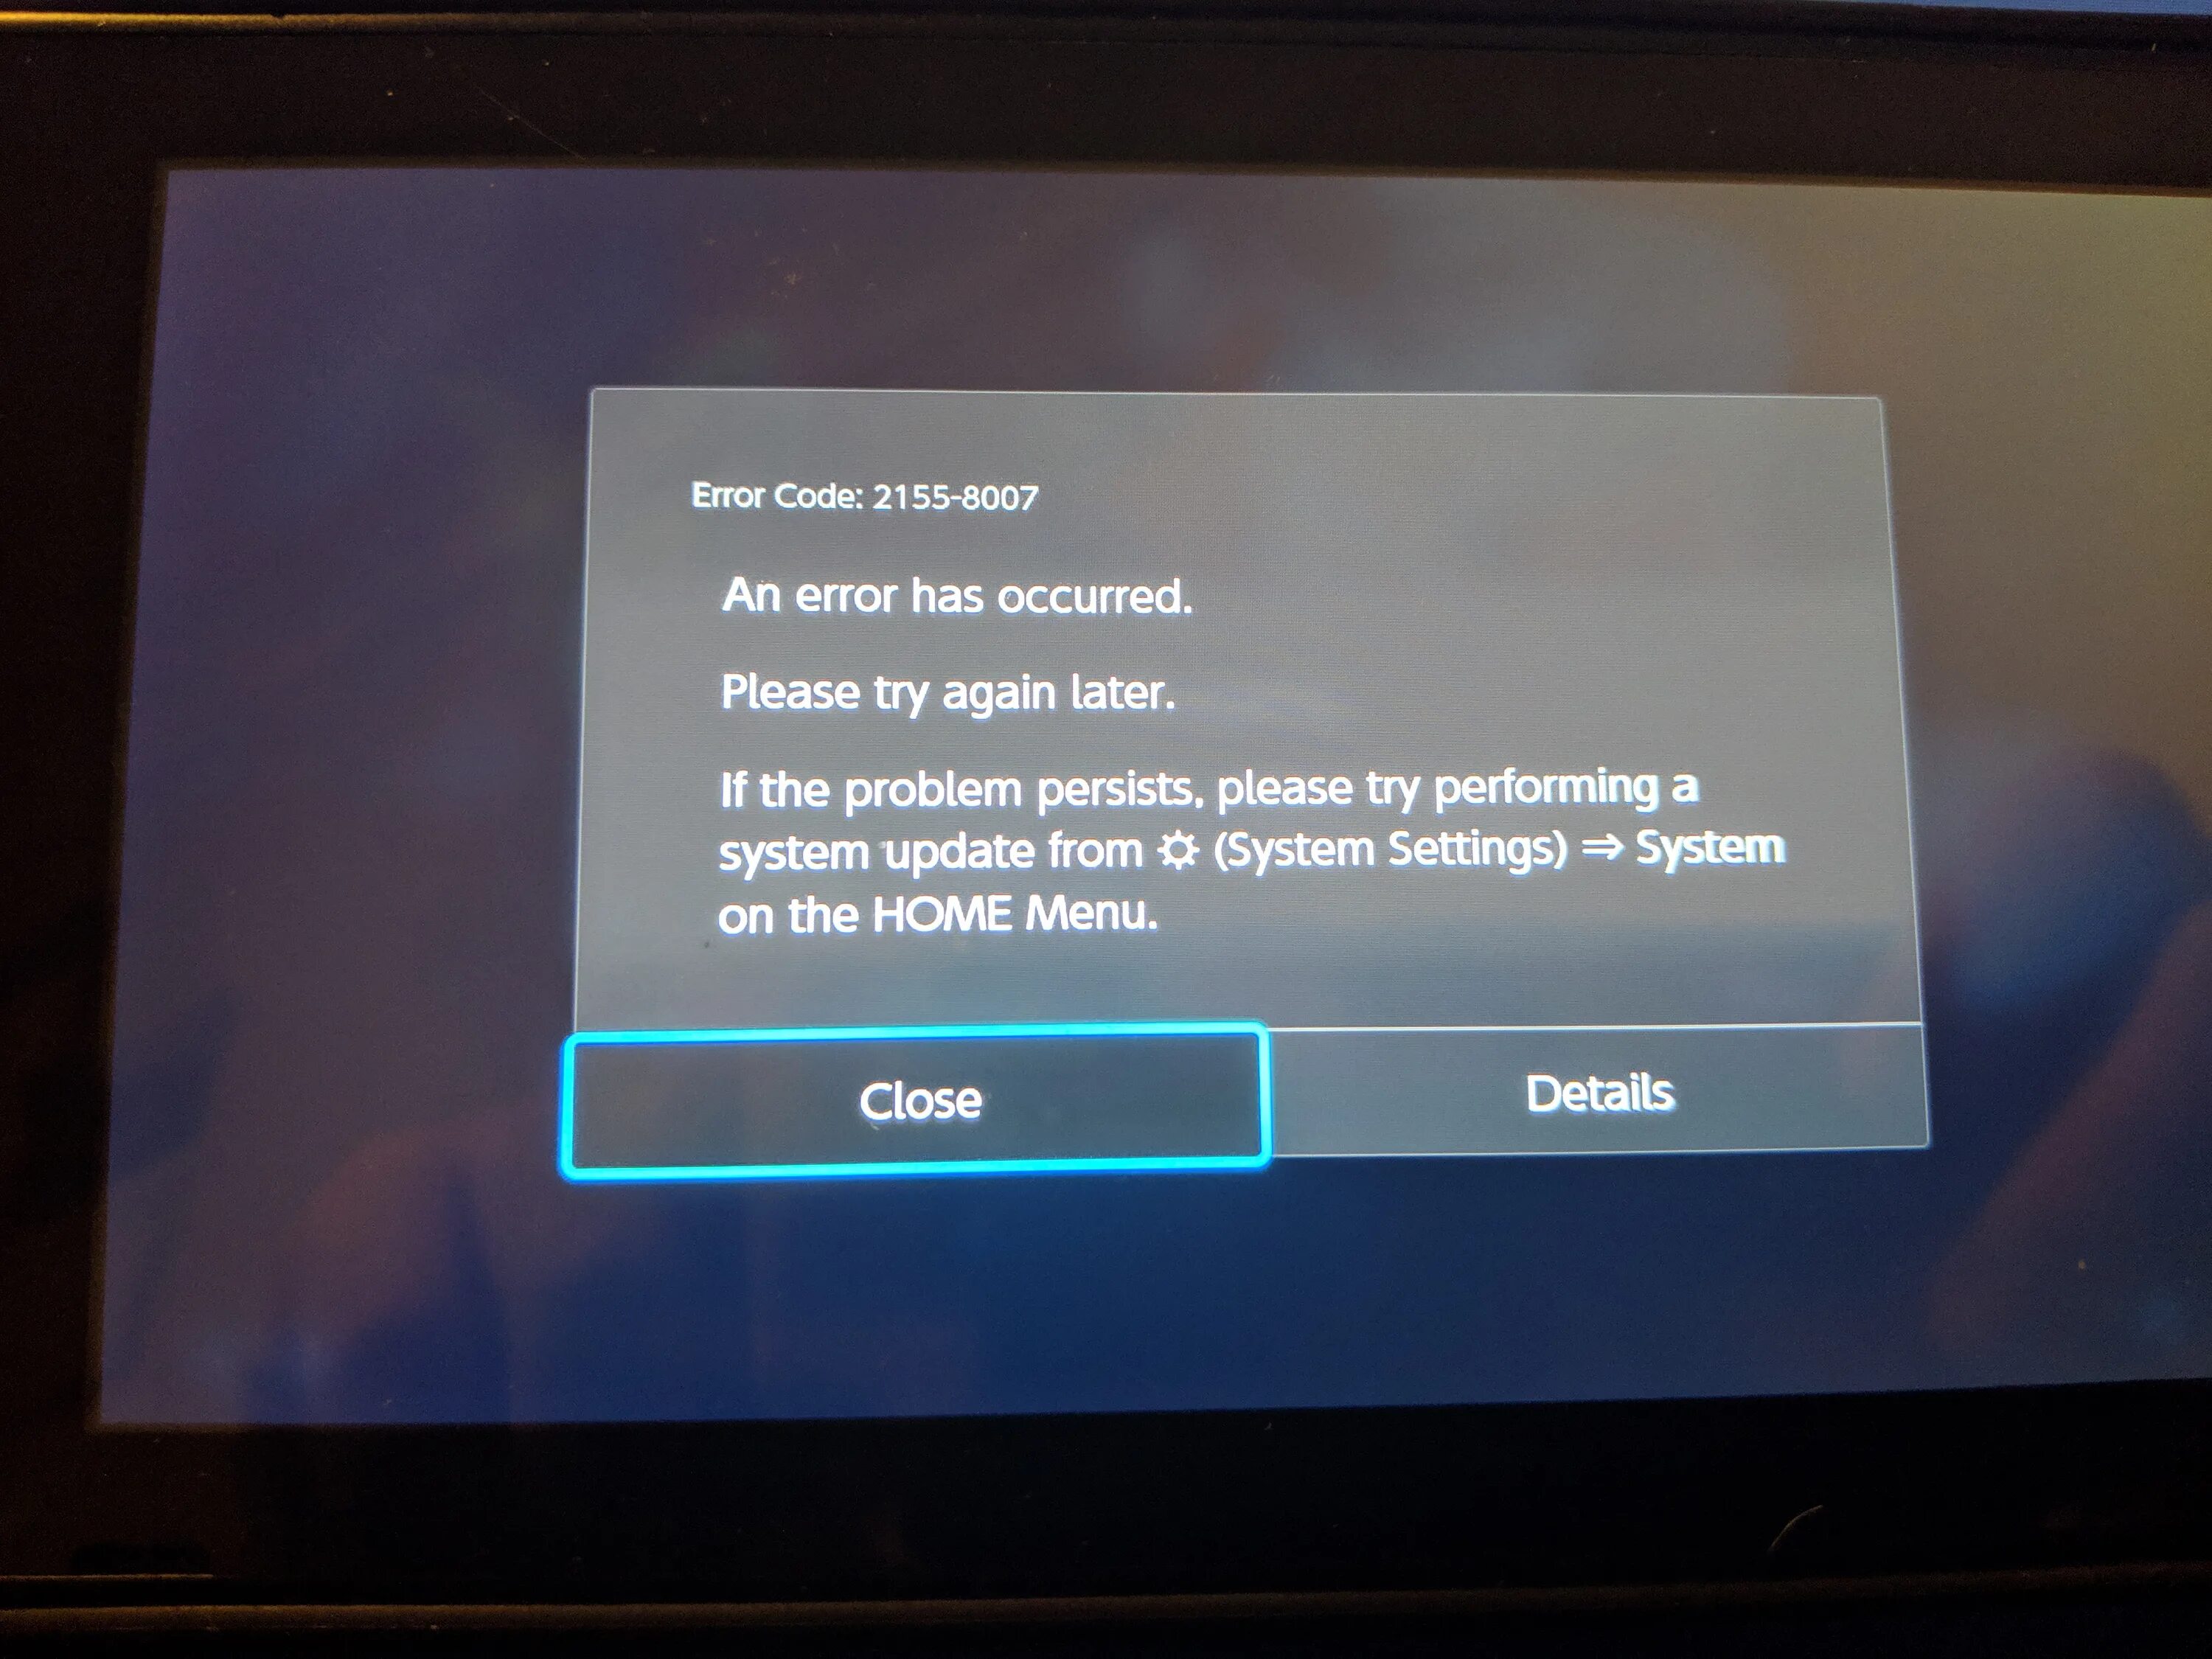 An error has occurred code. An Error occurred please try again later. An Error has occurred Nintendo Switch. An Error occurred please try again later youtube на телевизоре самсунг. The software was closed because an Error occurred Nintendo Switch.